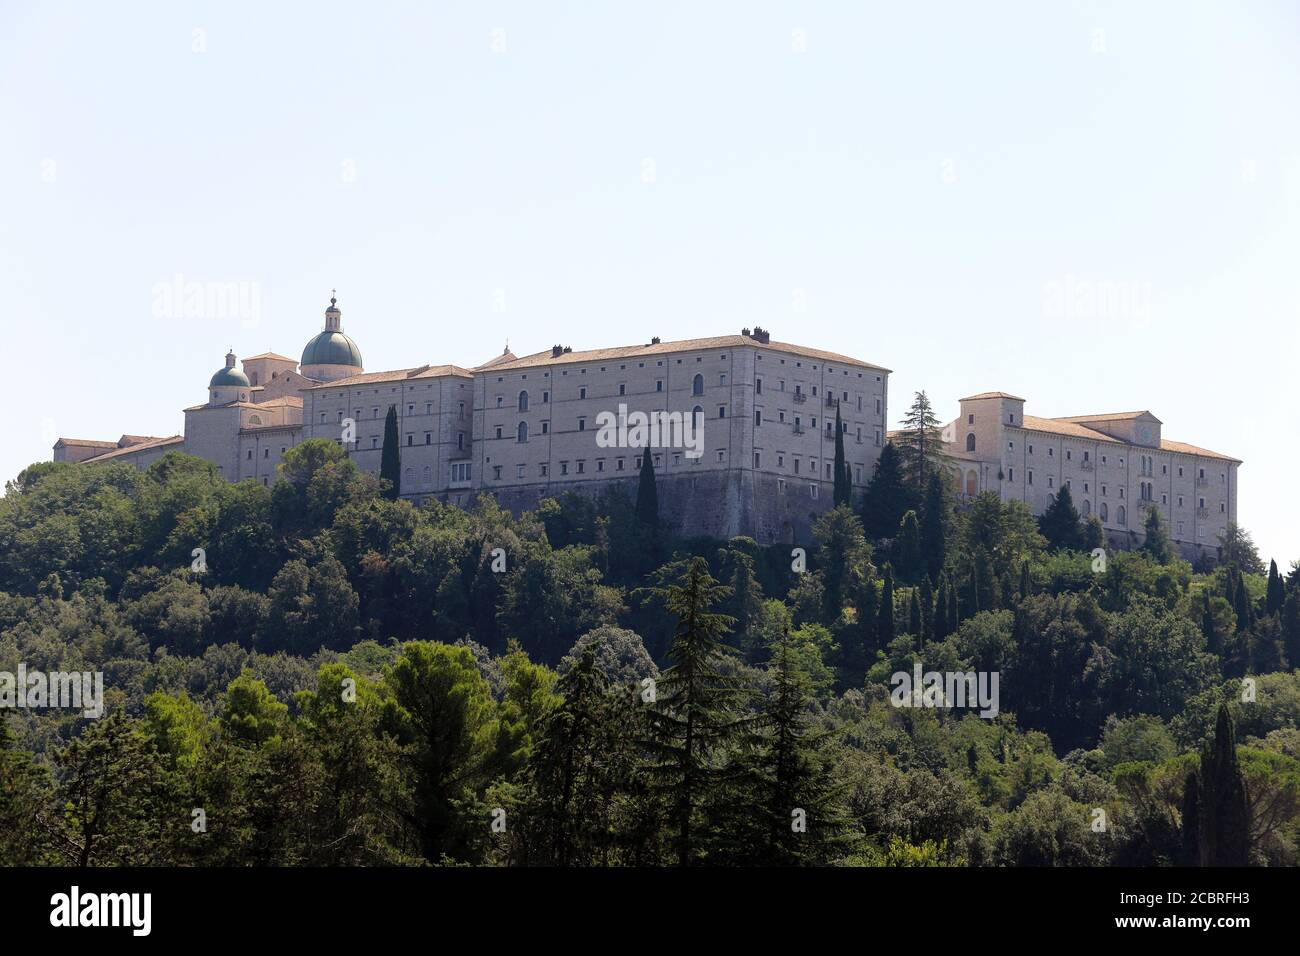 Cassino, Italy - August 14, 2020: View of Montecassino Abbey from the Polish Military Cemetery Stock Photo